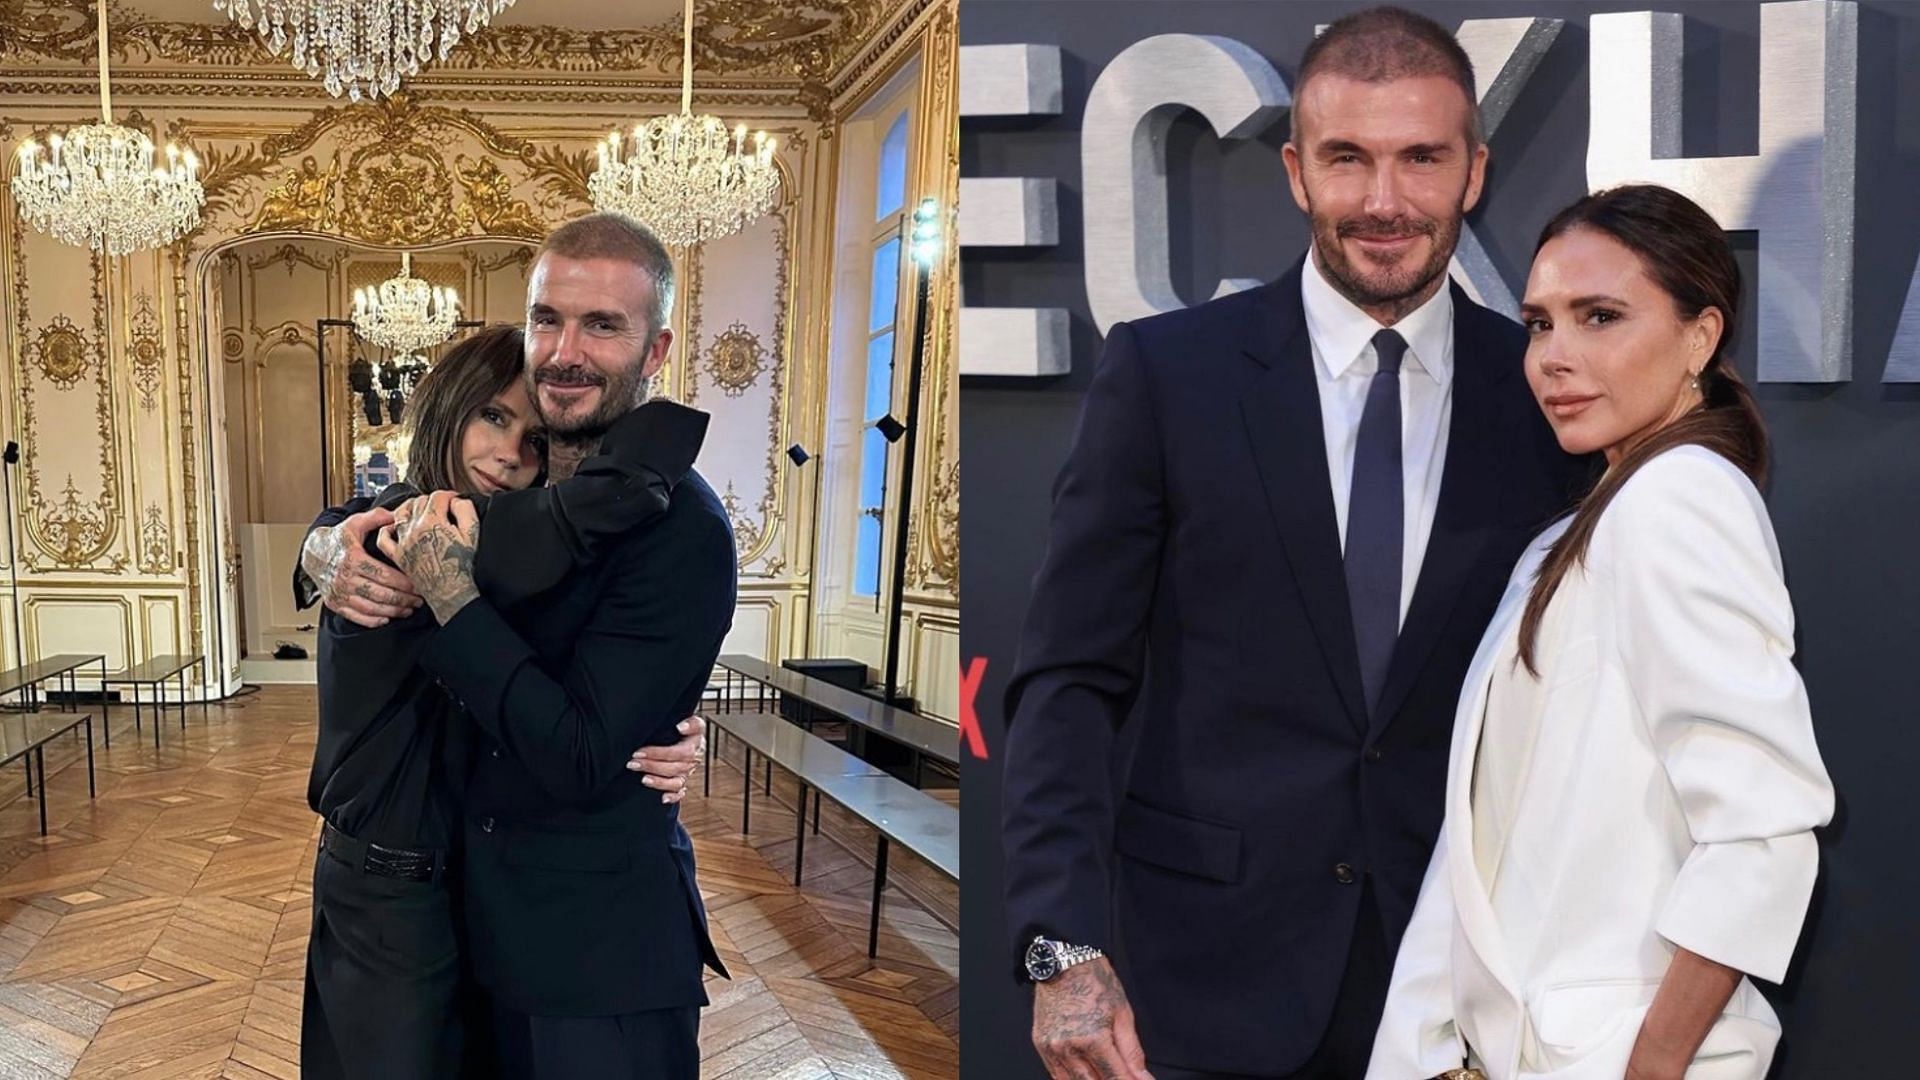 David Beckham mocked his wife Victoria for claiming that she belonged to the &quot;working class.&quot; (Images via Instagram/@davidbeckham &amp; @victoriabeckham)